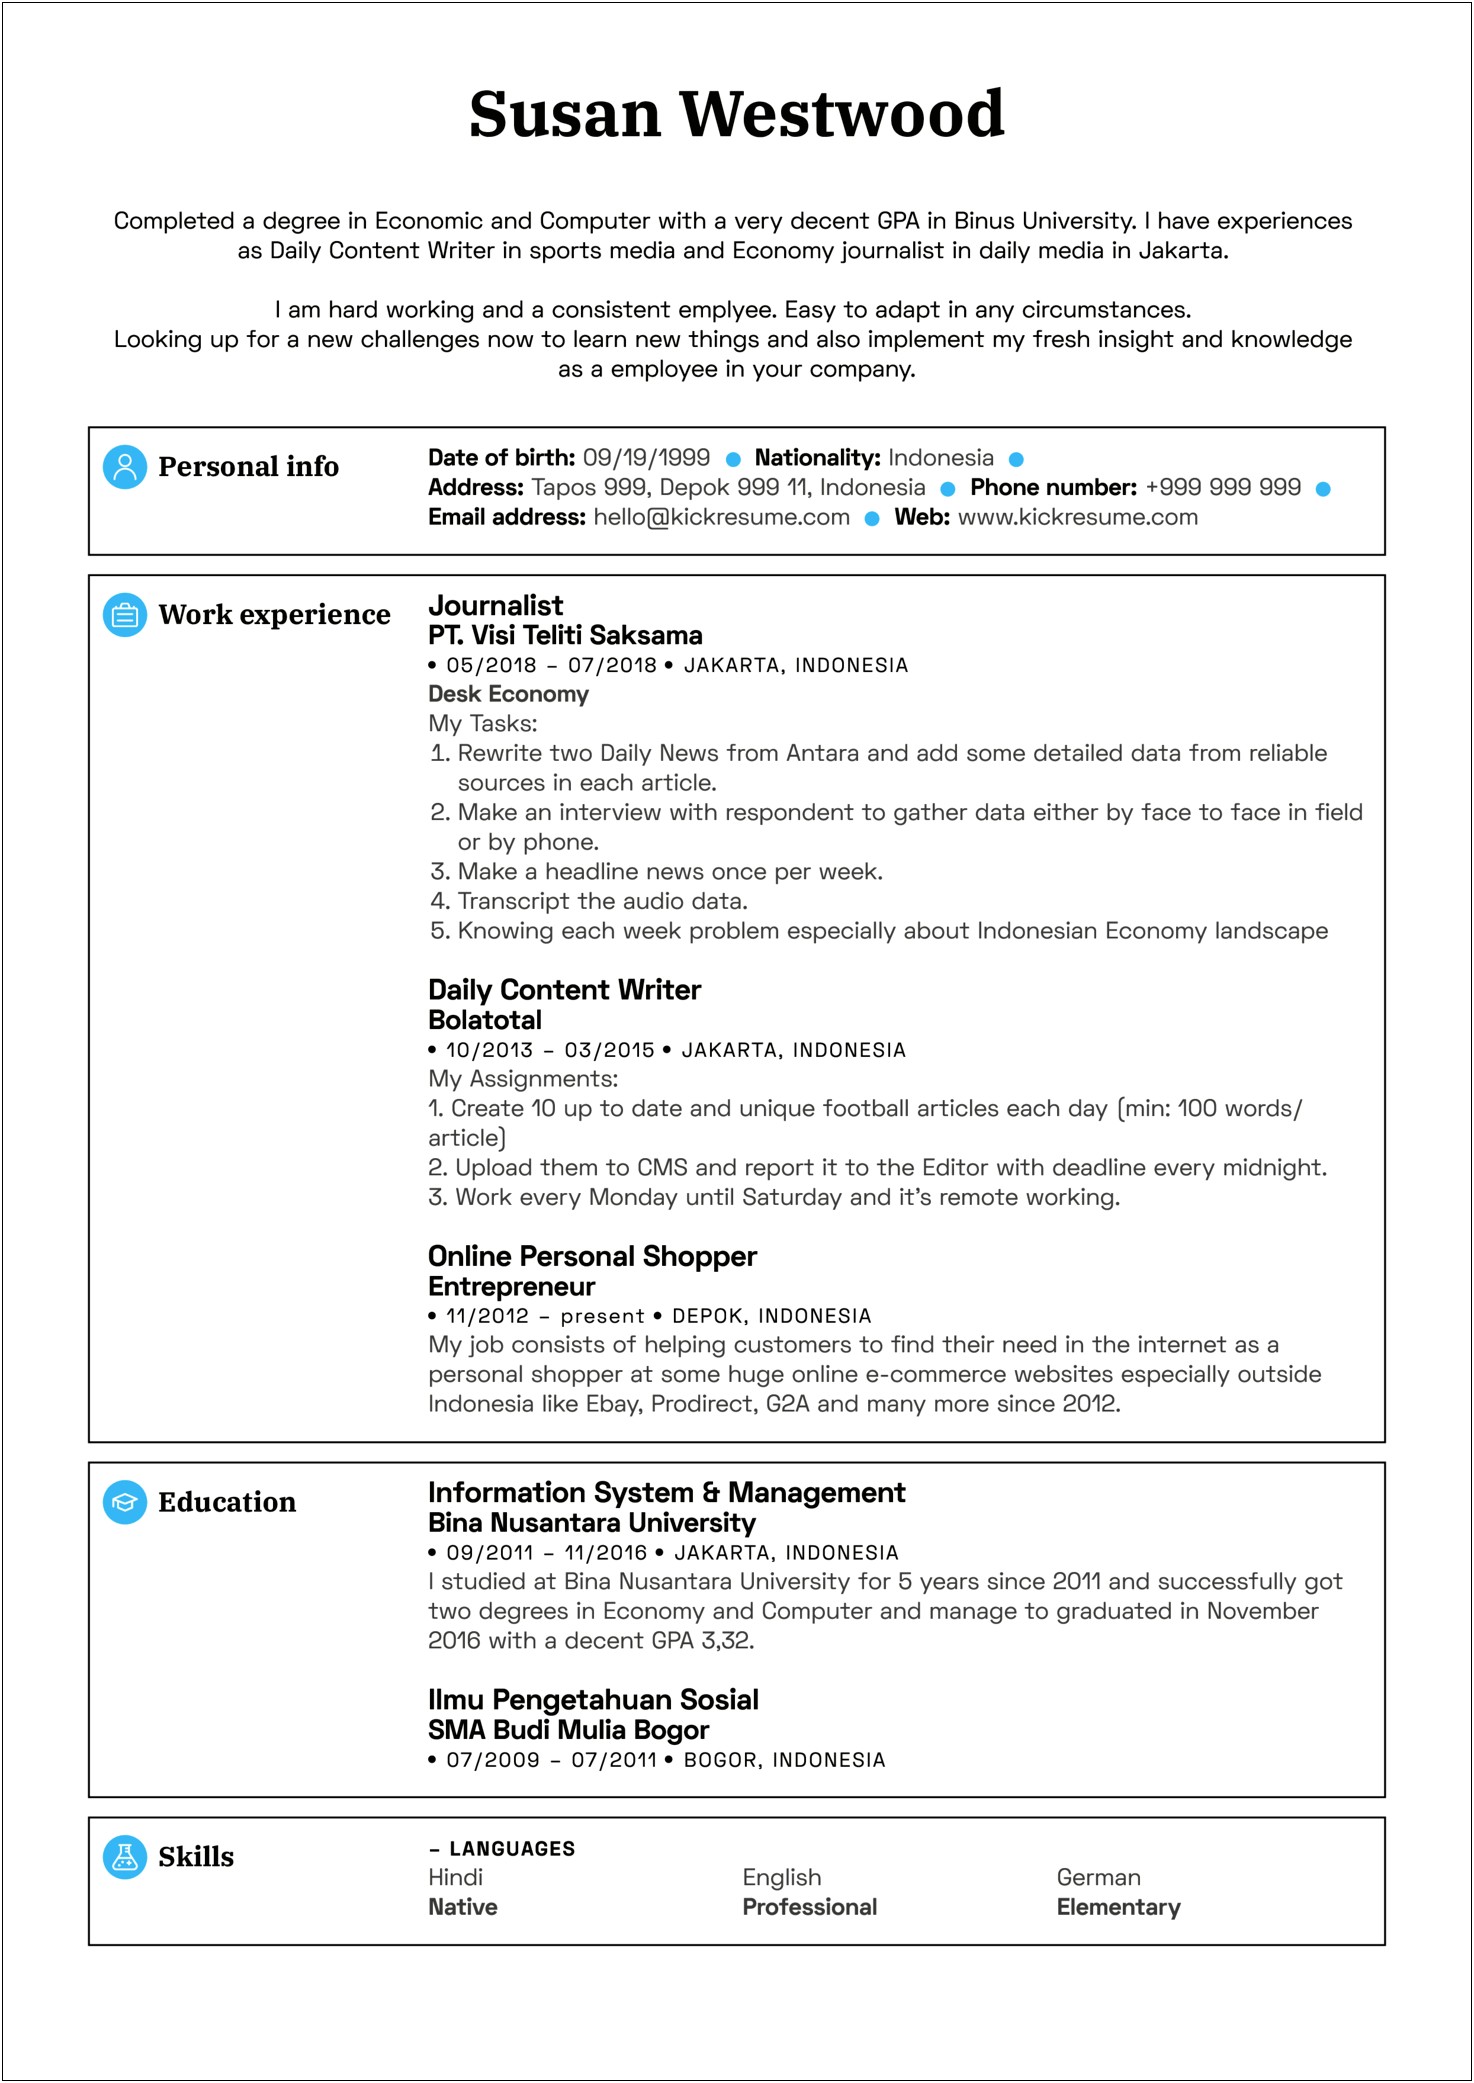 Resume Samples For Content Writer